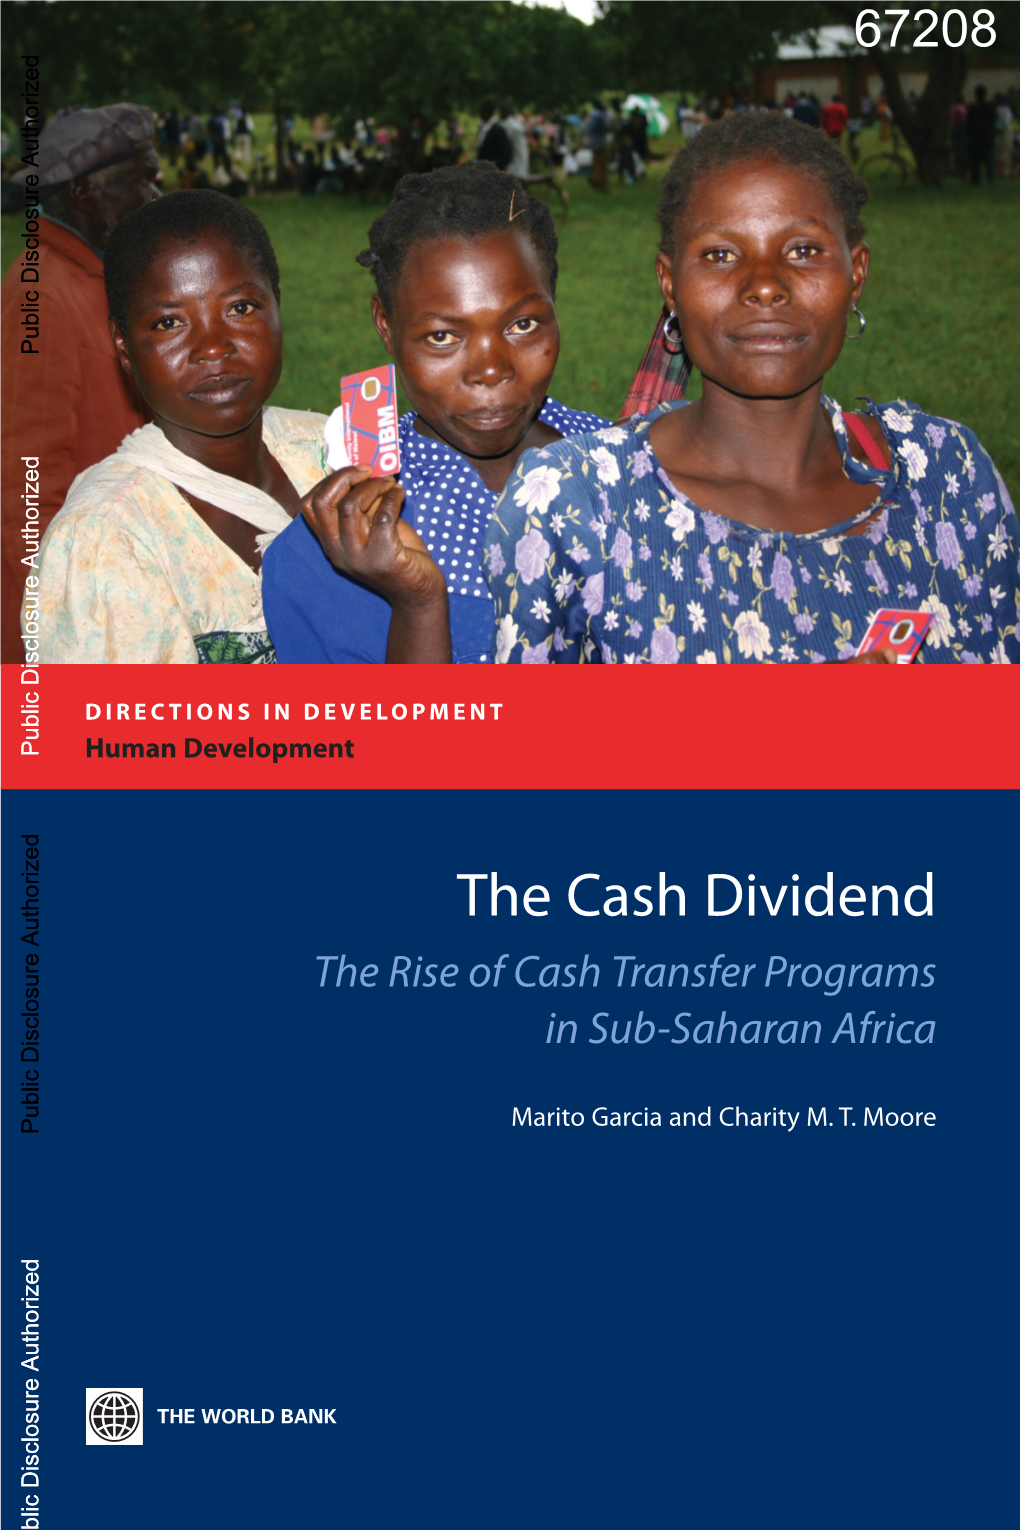 The Rise of Cash Transfer Programs in Sub-Saharan Africa